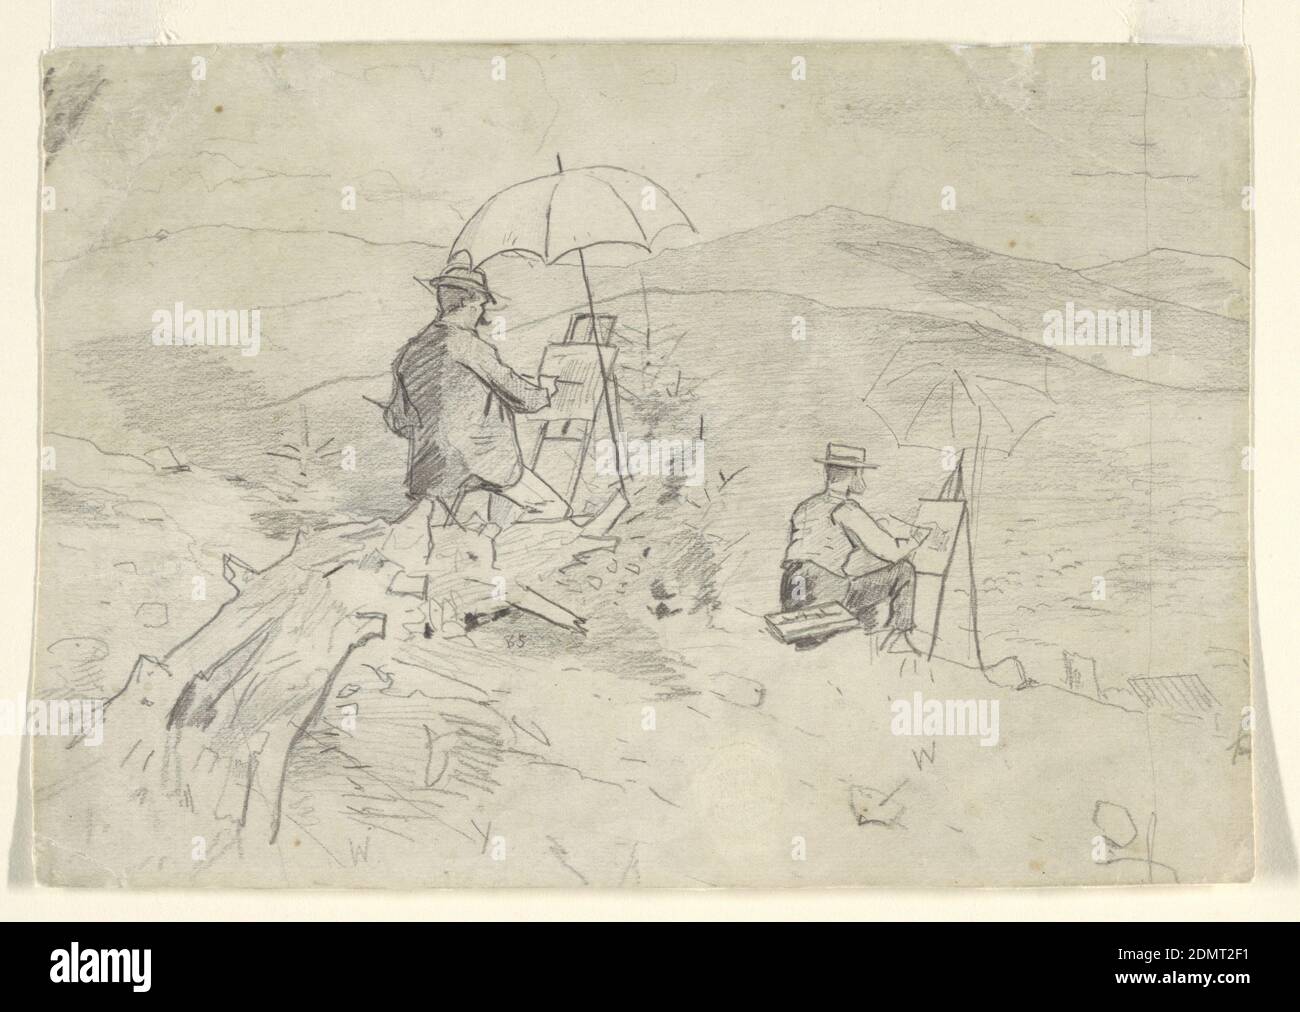 Artists Sketching in the White Mountains, Winslow Homer, American, 1836–1910, Graphite on off-white wove paper, blackened on verso for tracing, Horizontal scene of two male figures (artists), with easels and umbrellas, painting on a hillside overlooking distant hills and mountains. Verso: Vertical sketch of two male heads of soldiers, parts of other sketches, one of which is invalidated; another very rough one shows a bust portrait., USA, 1868, figures, Drawing Stock Photo